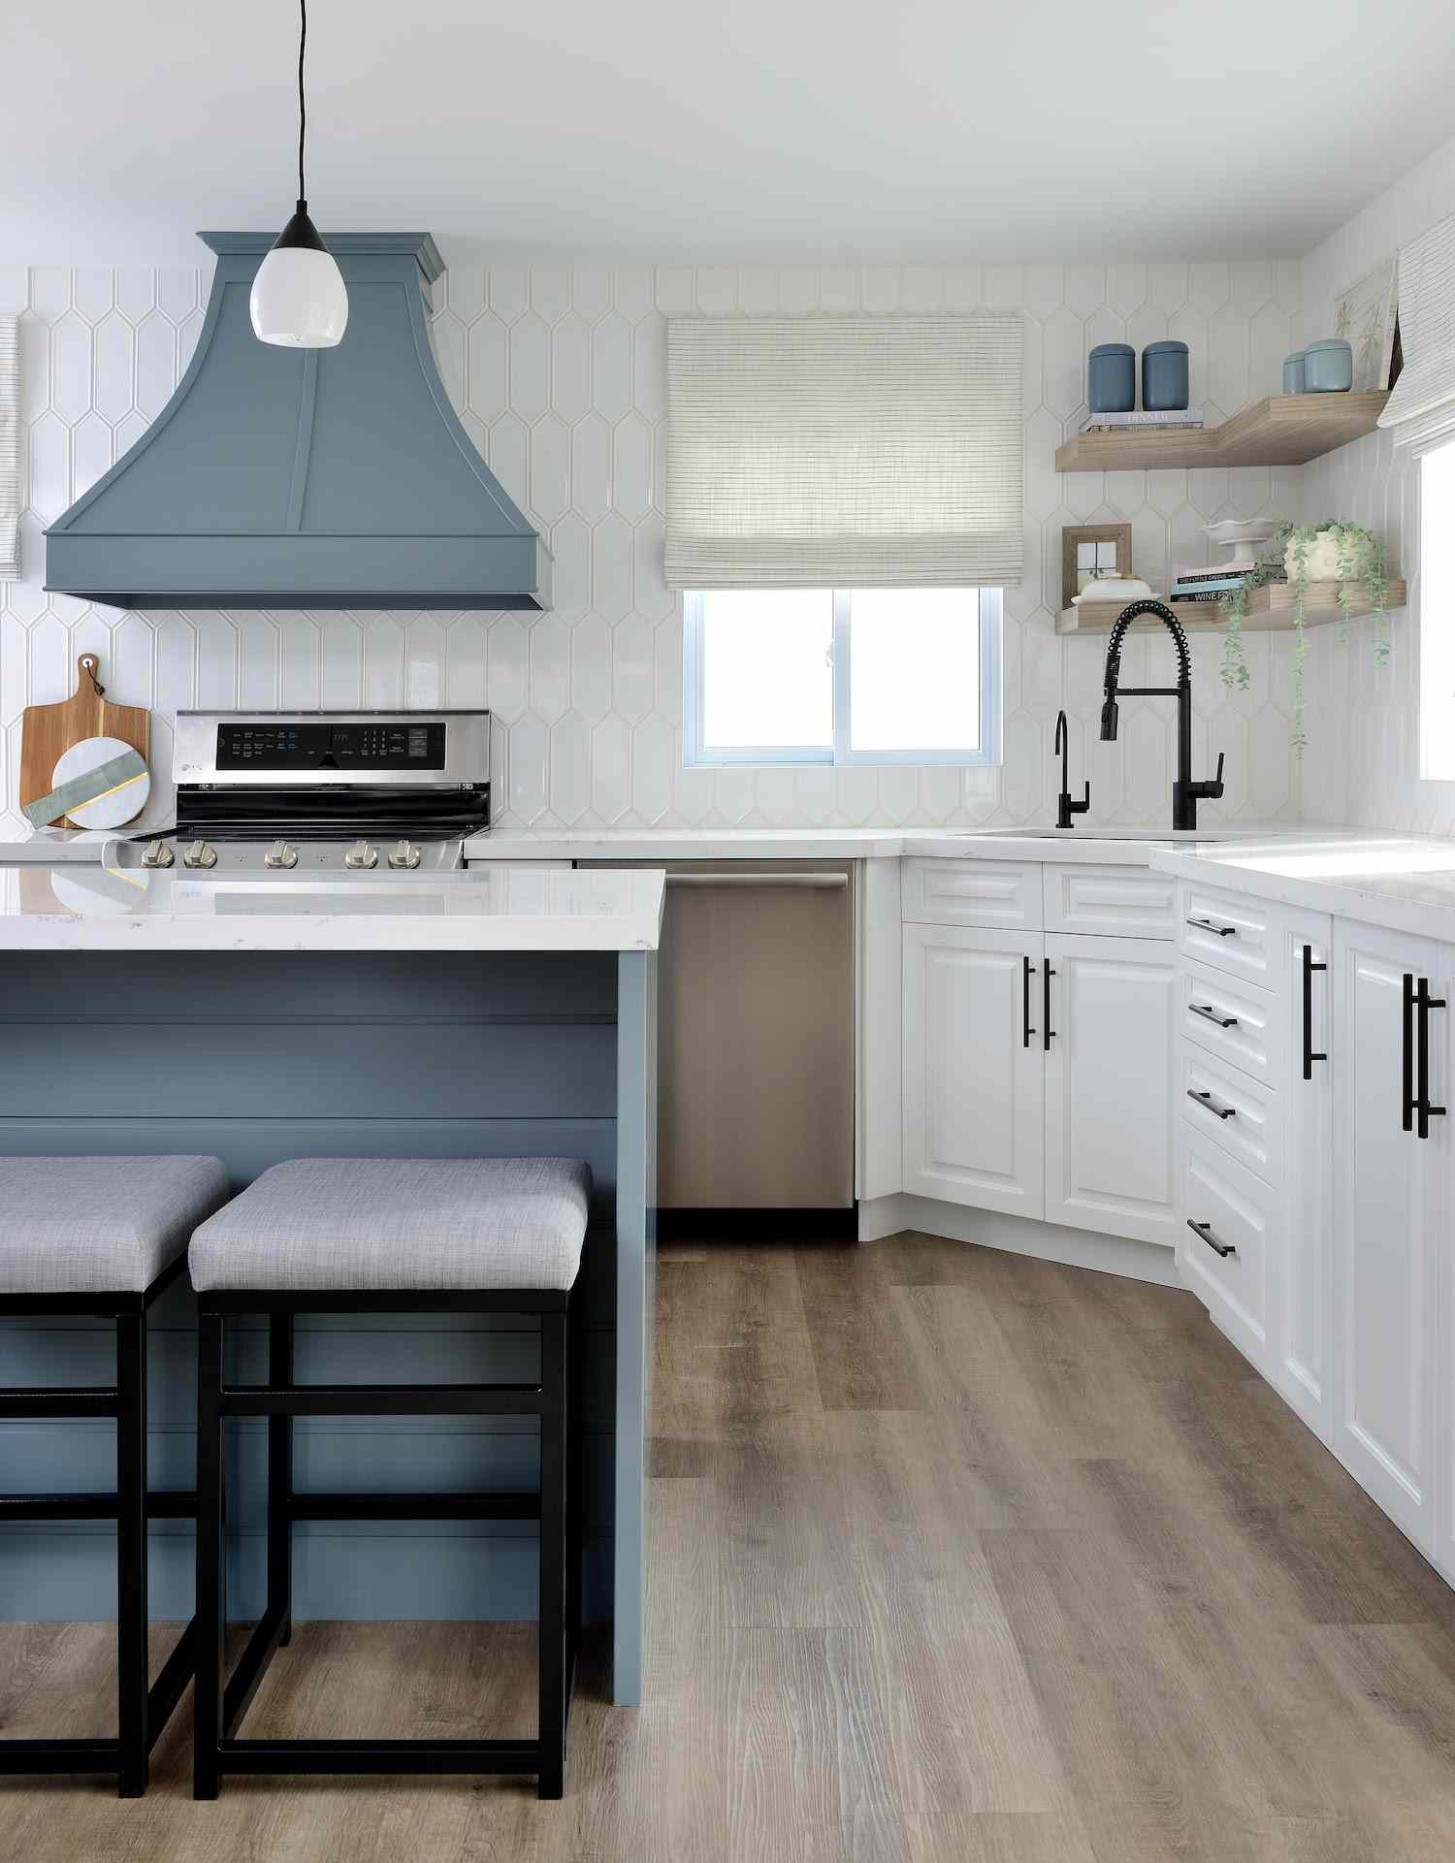 8 Small Kitchen Paint Colors to Open Up Your Space - what is a good color for a small kitchen?